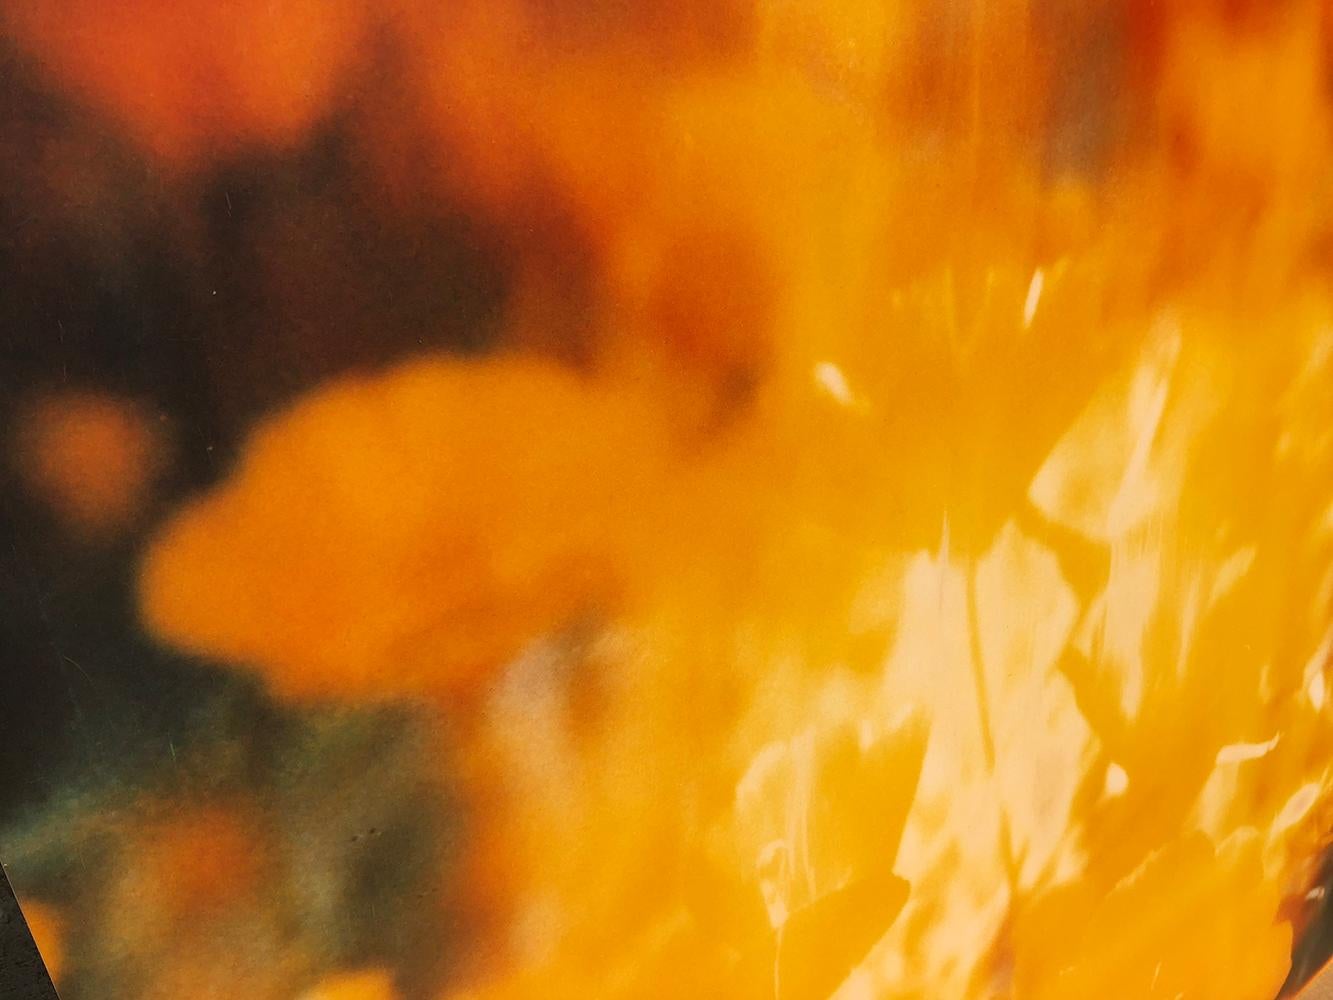 Yellow Flower (The Last Picture Show) - 2005

128x125cm, Edition of 4/5. 
Analog C-Print, hand-printed by the artist on Fuji Crystal Archive Paper, 
based on a Polaroid.  
Signed on back with certificate.  
Artist Inventory 672.04. 
Mounted on